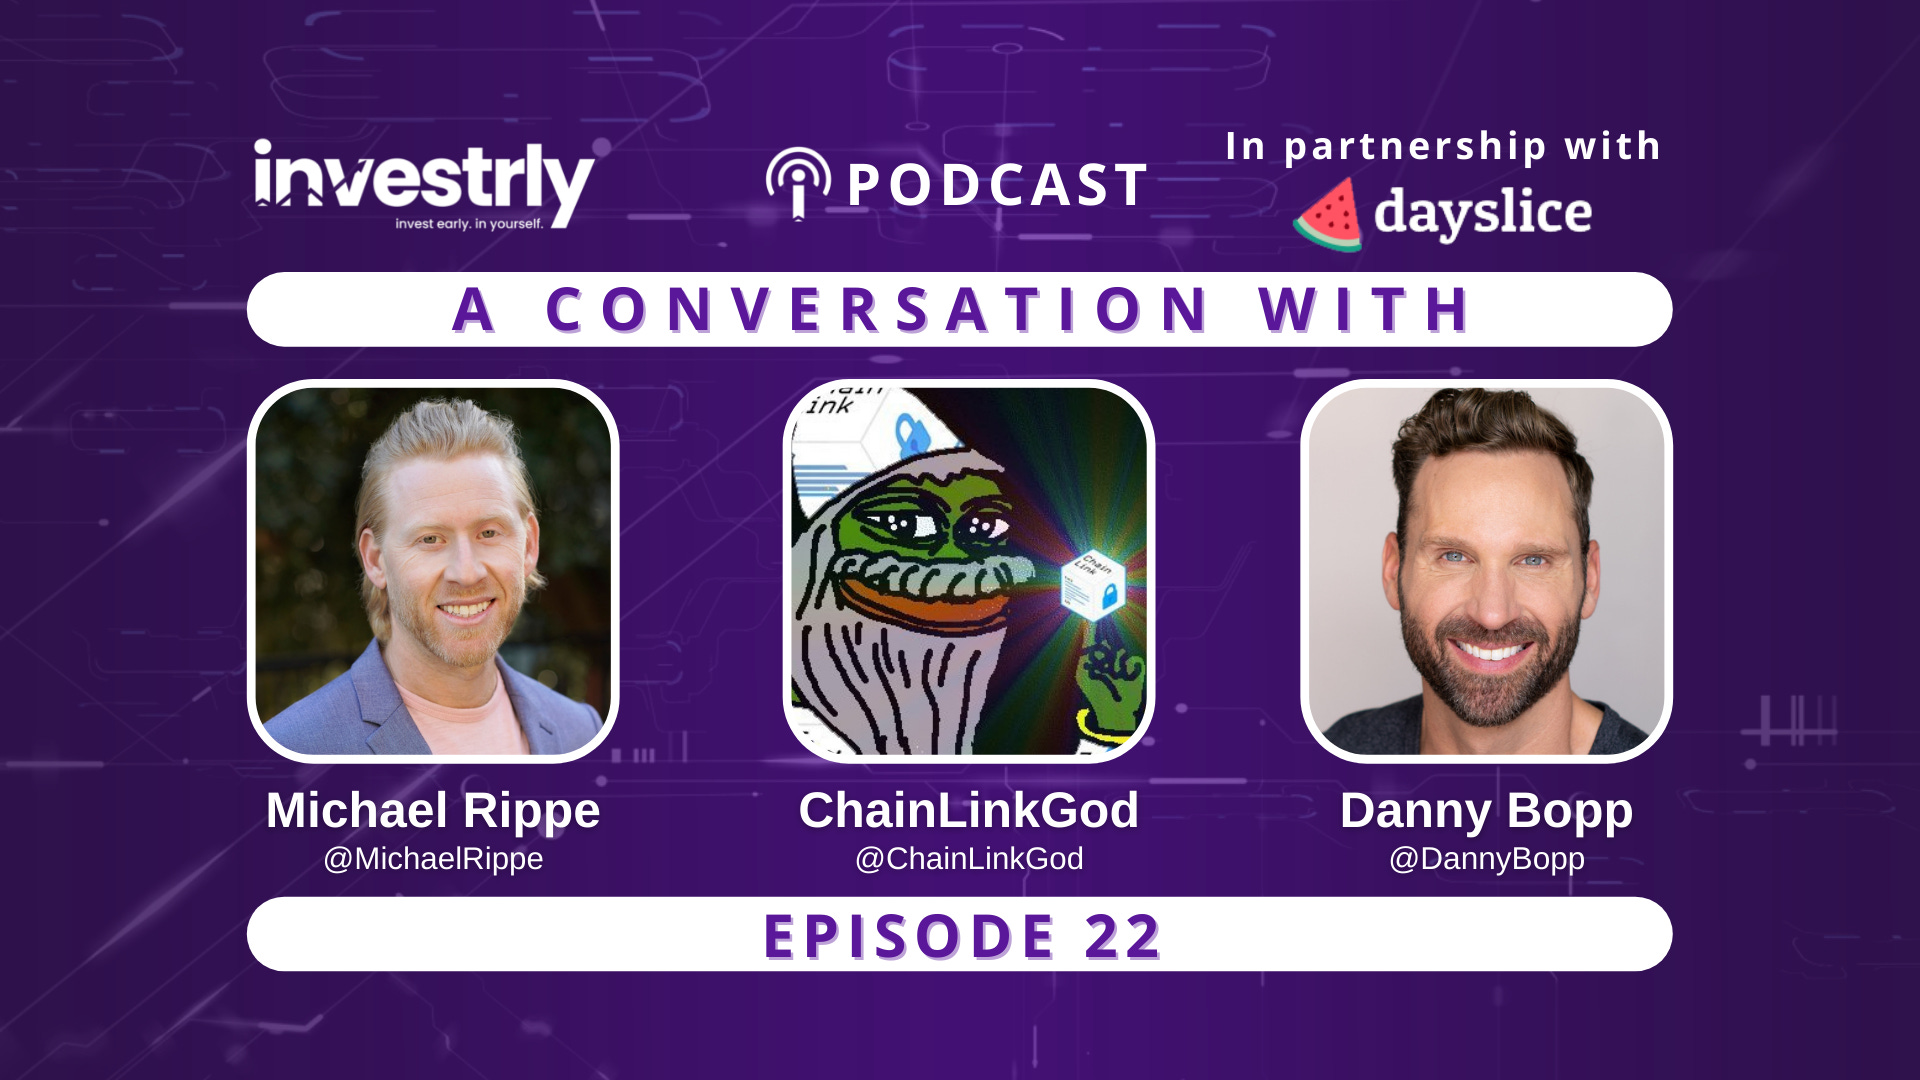 🎧 Ep 22: A Conversation With ChainLinkGod